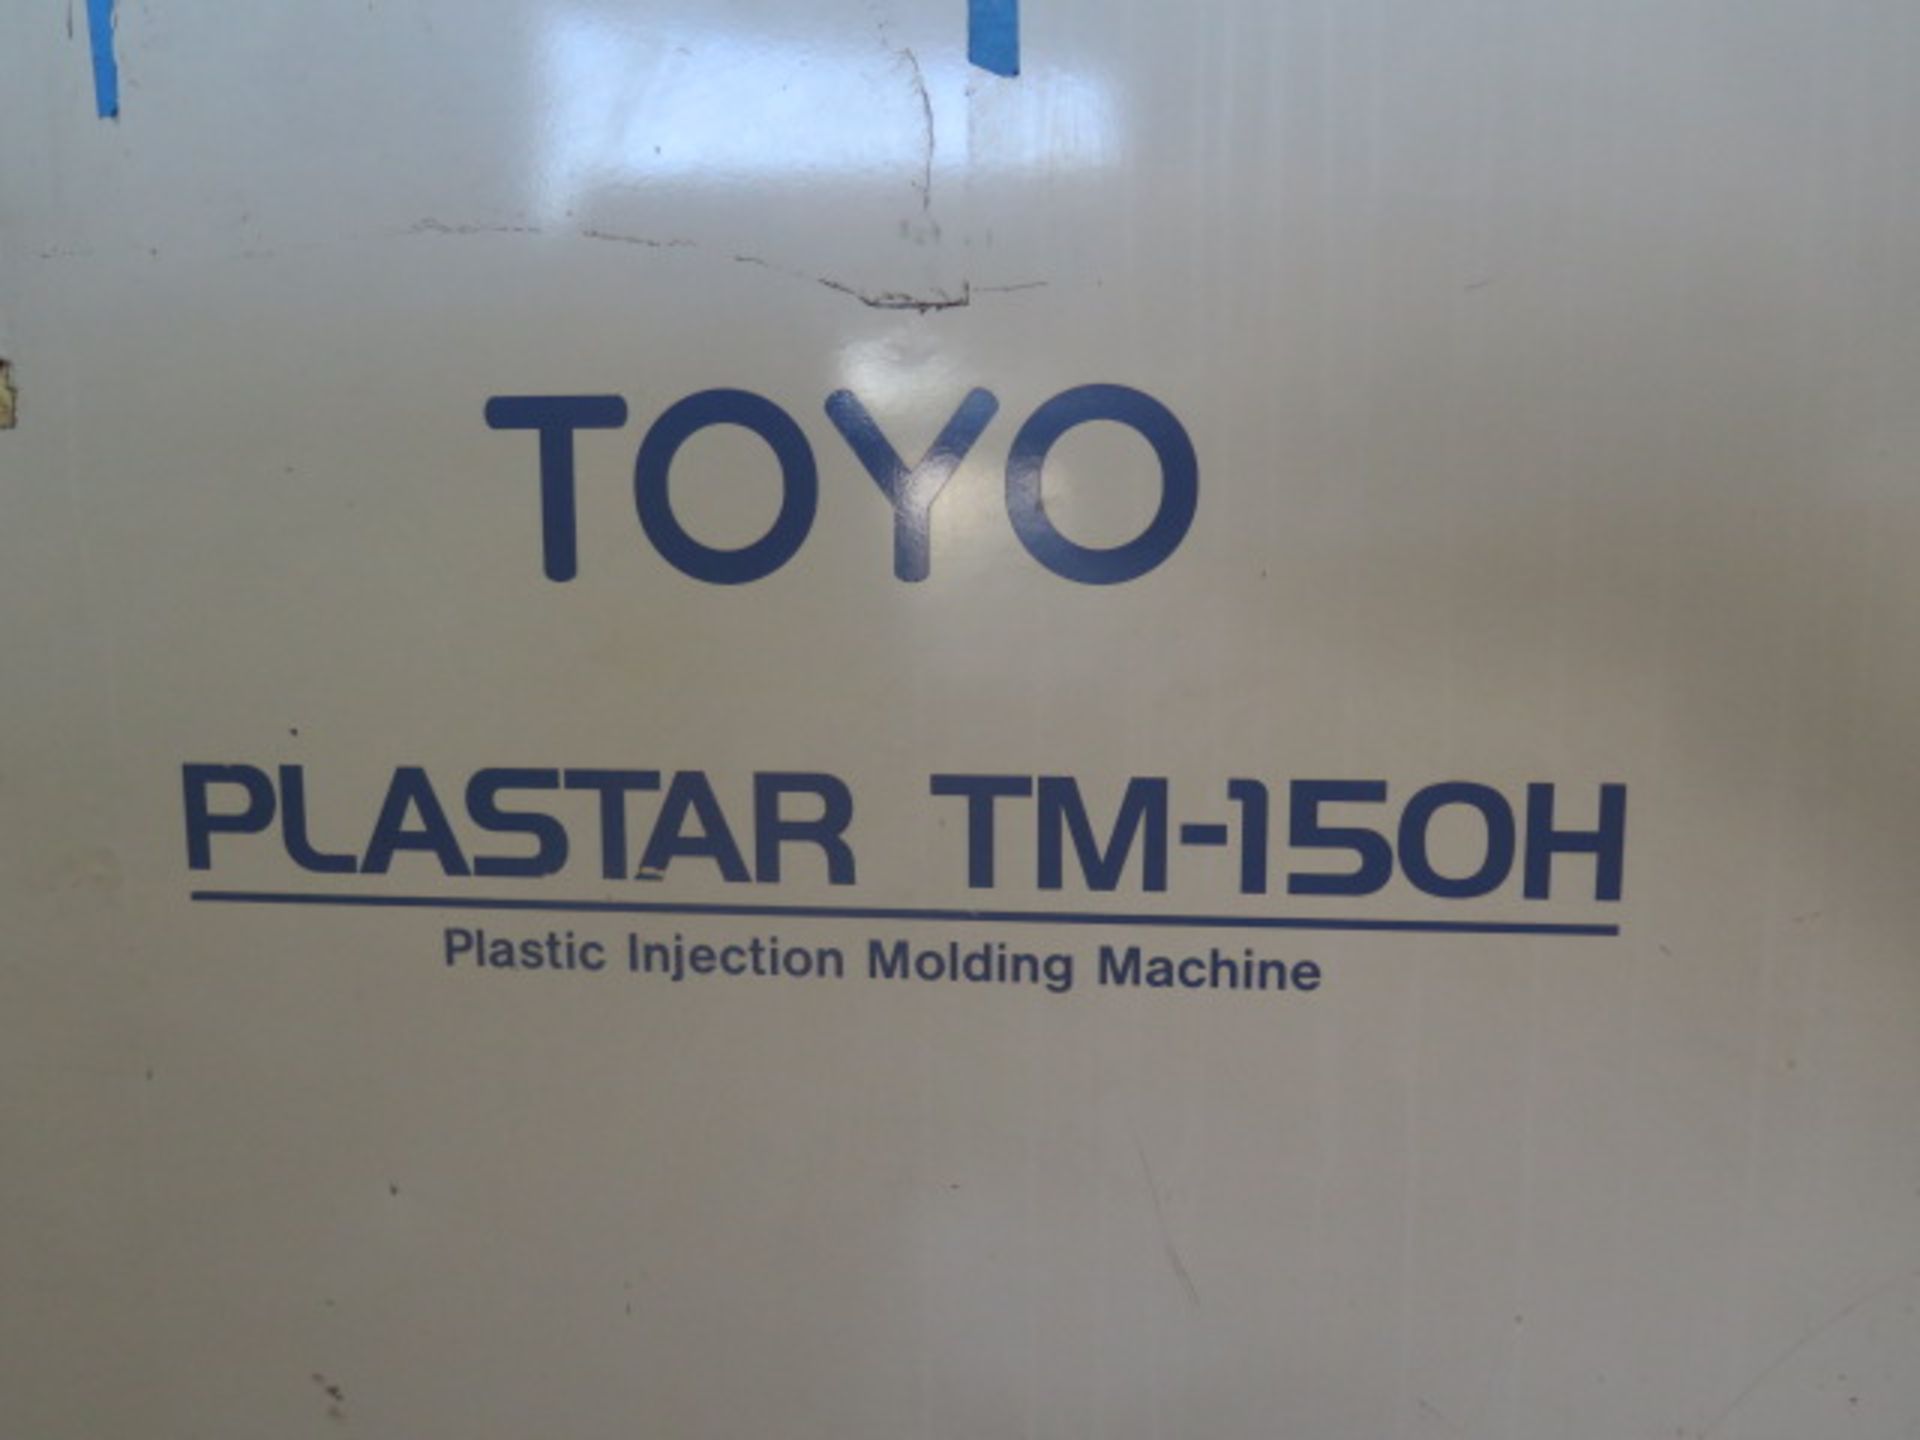 1997 Toyo Machine “Plastar TM-150H” 150 Ton CNC Plastic Injection Molding s/n 1140036, SOLD AS IS - Image 18 of 19